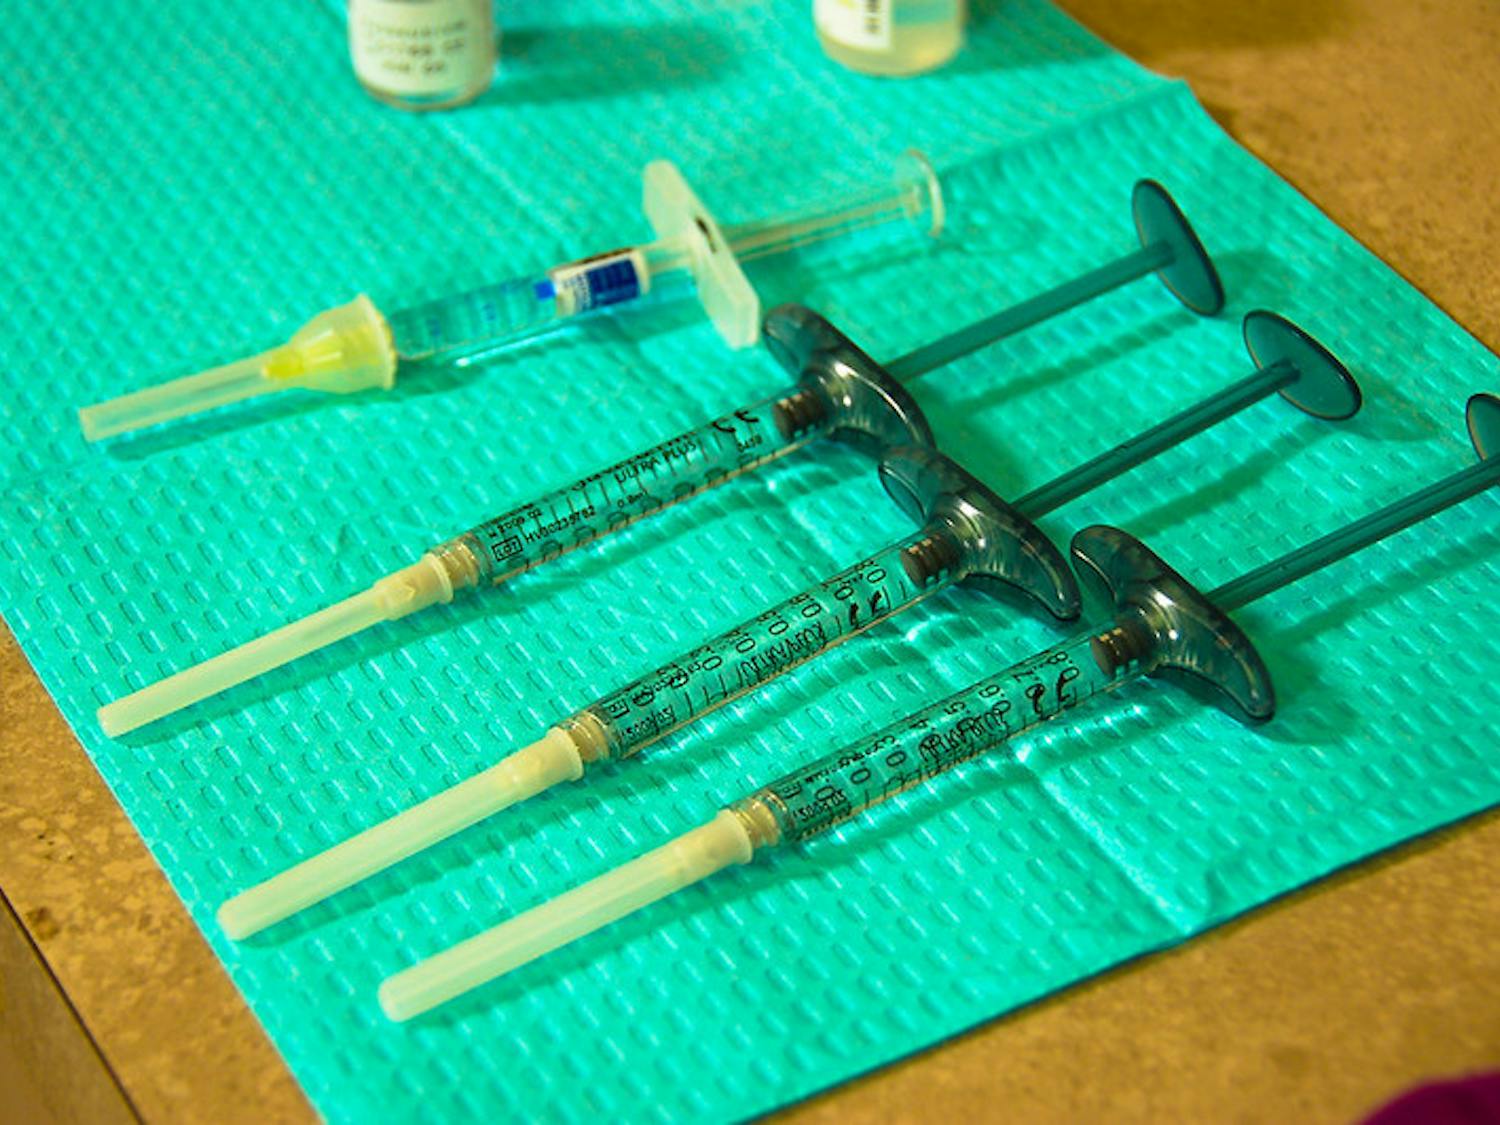 The College offers tuberculosis skin tests, which involve injections (Photo courtesy of Flickr/“The Needles” by Jeff Deel. January 23, 2008).